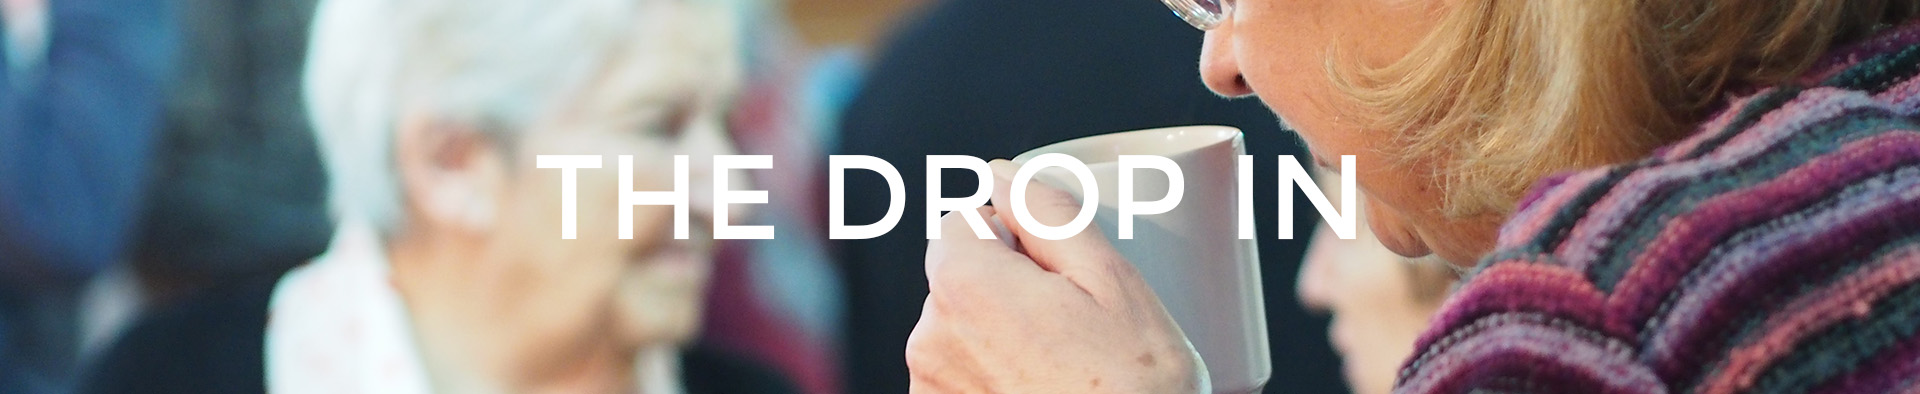 The Drop In